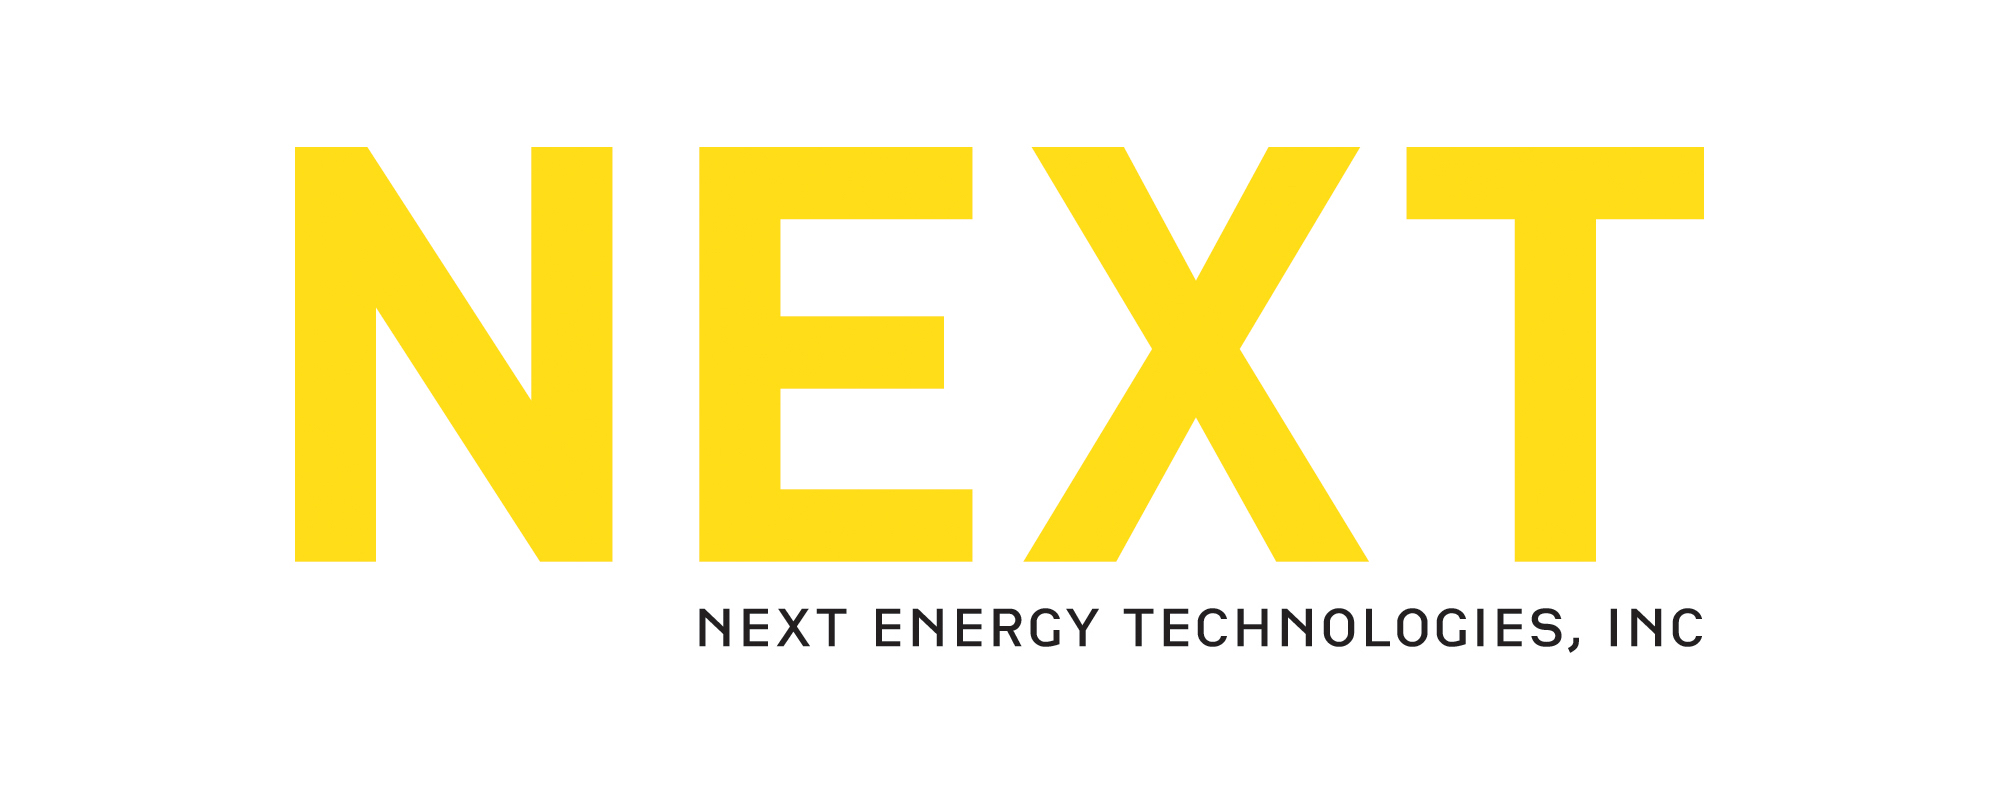 Next Energy Technologies, Inc. (NEXT) is Chosen to Help Accelerate ...